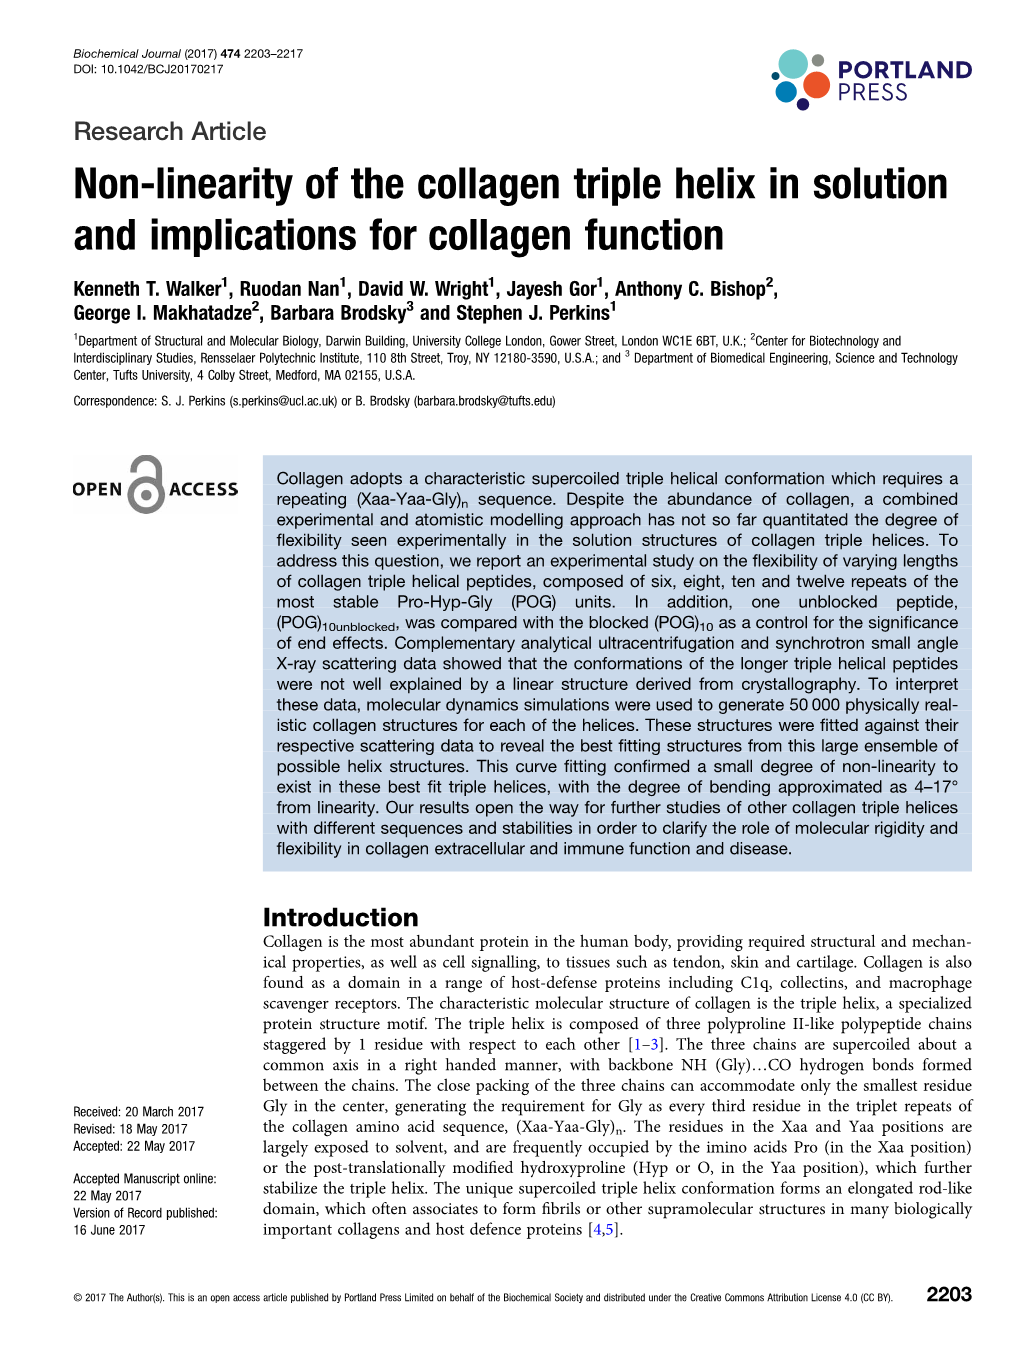 Non-Linearity of the Collagen Triple Helix in Solution and Implications for Collagen Function